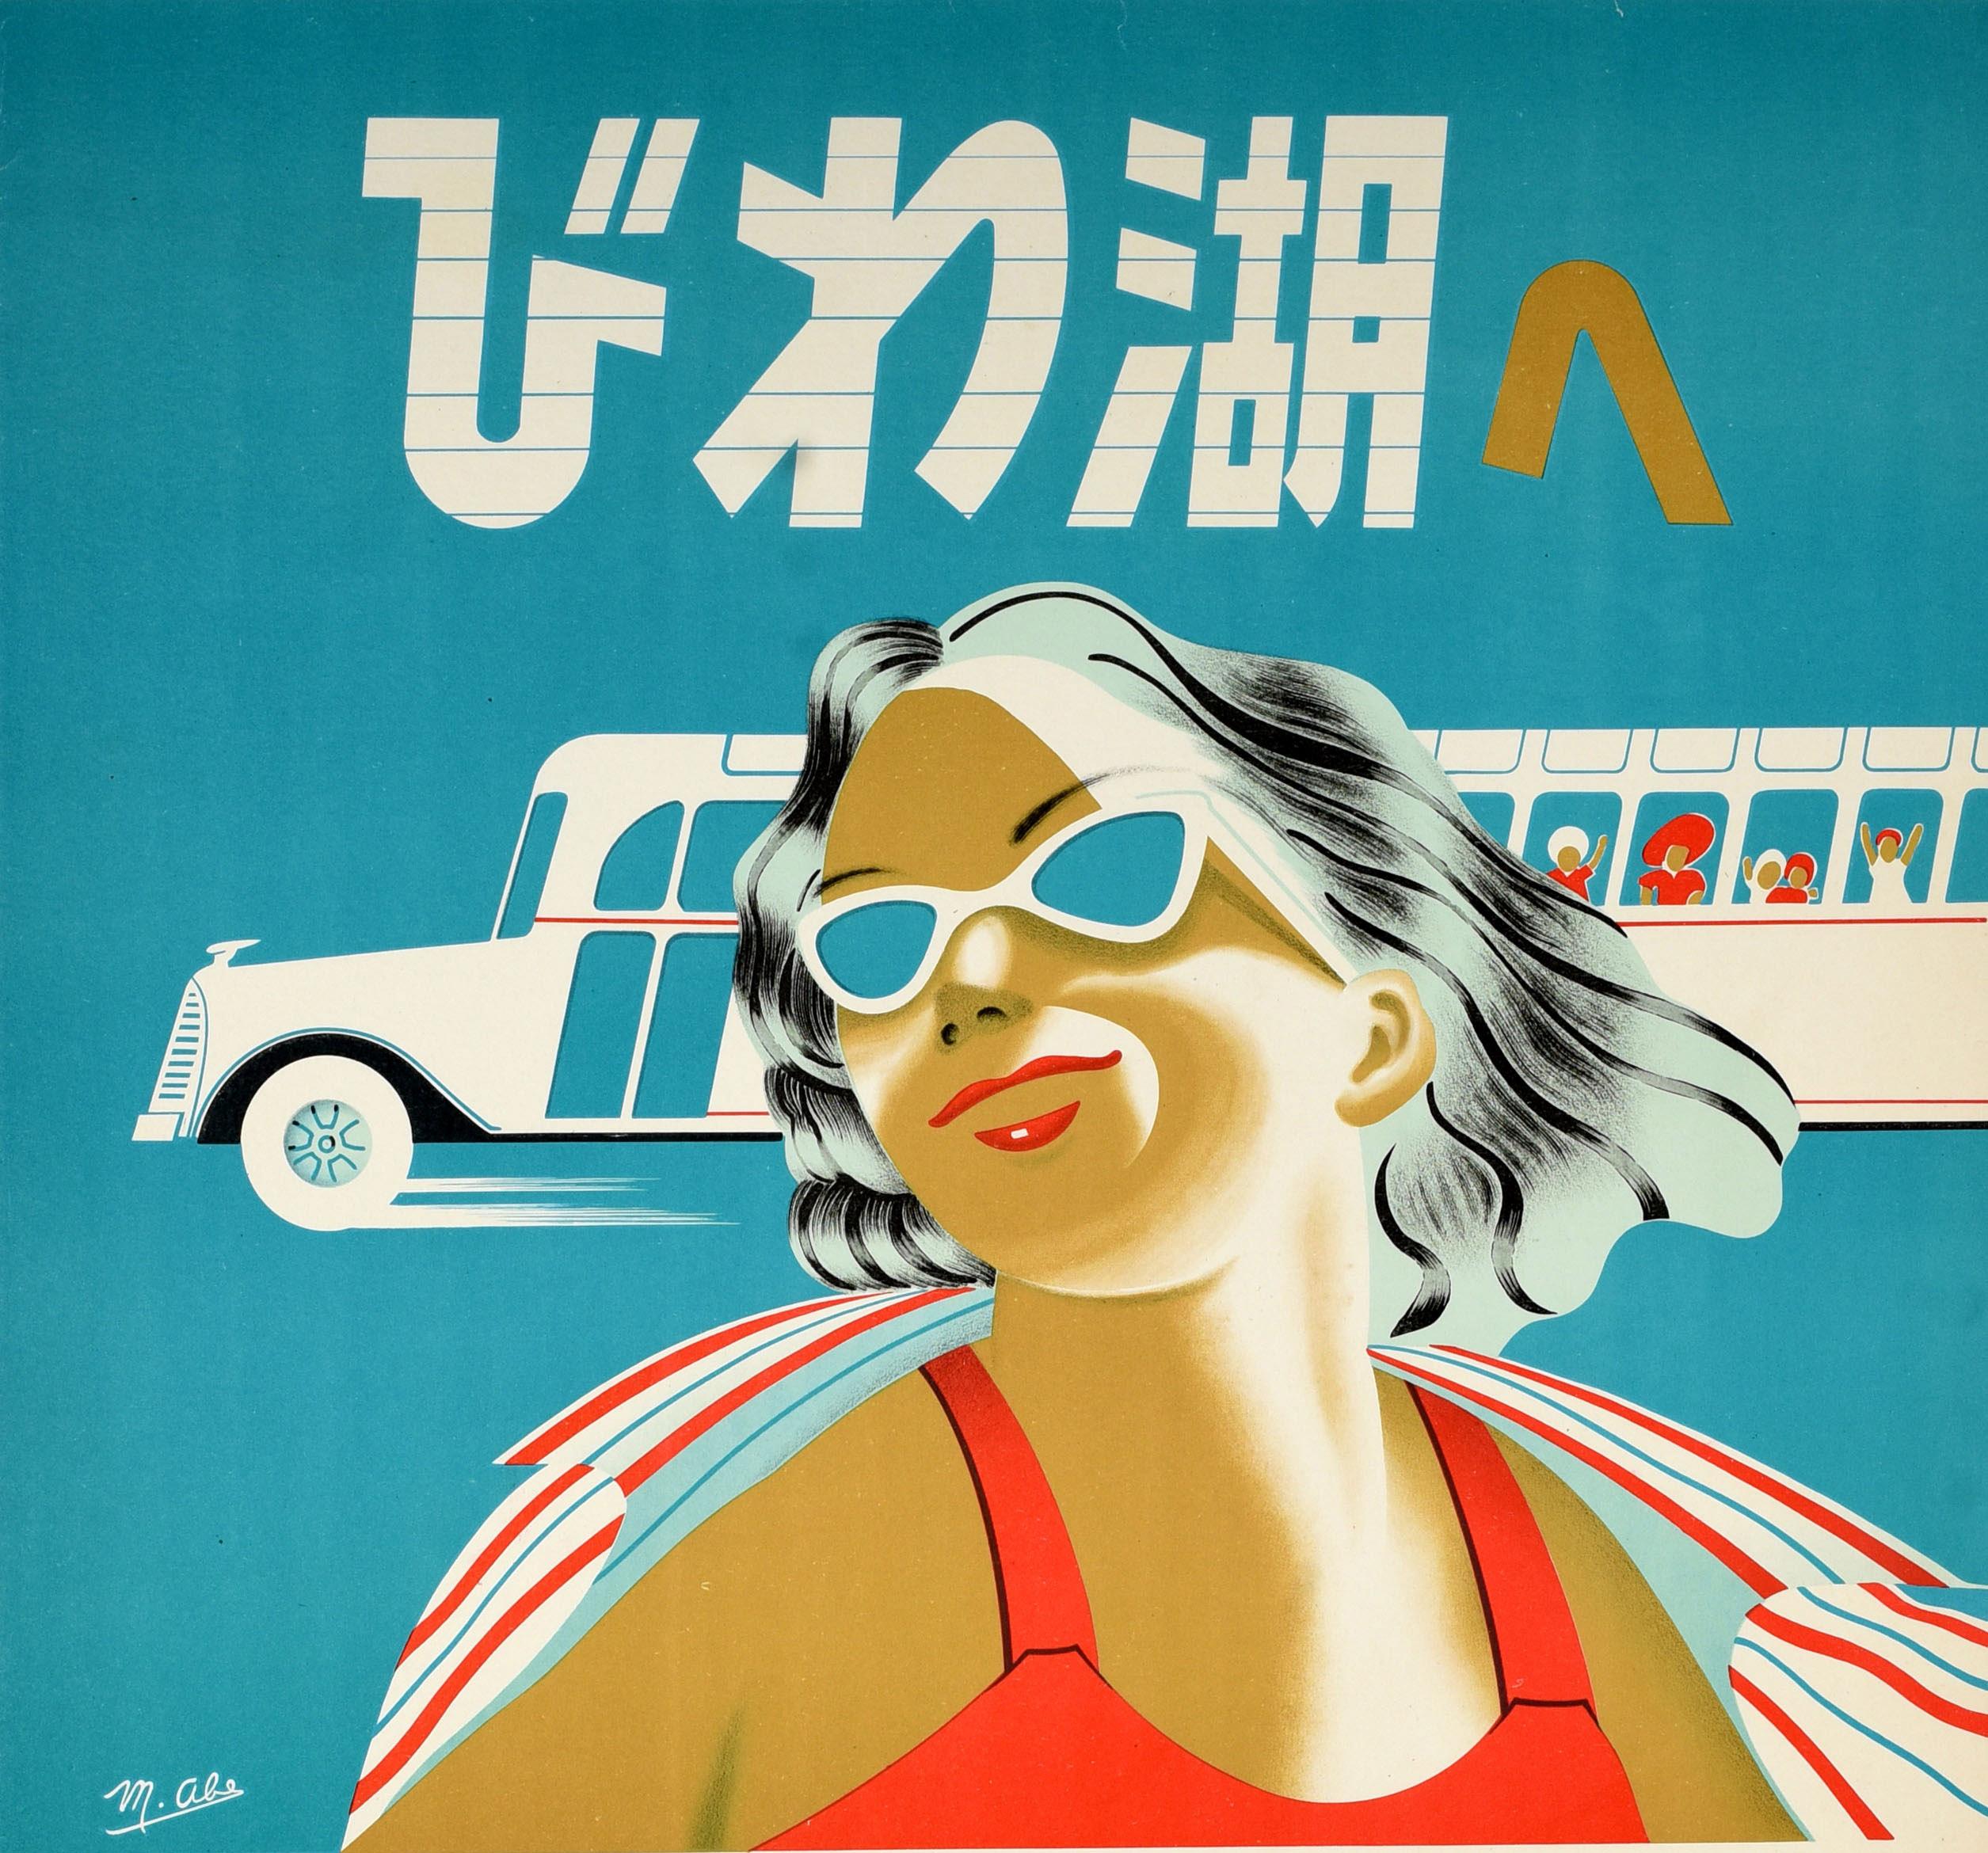 Original vintage travel poster for Lake Biwa in Japan advertising group trips to the swimming lake by comfortable tour bus featuring a smiling lady wearing sunglasses and a red swimsuit with a colourful towel over her shoulders in front of a bus